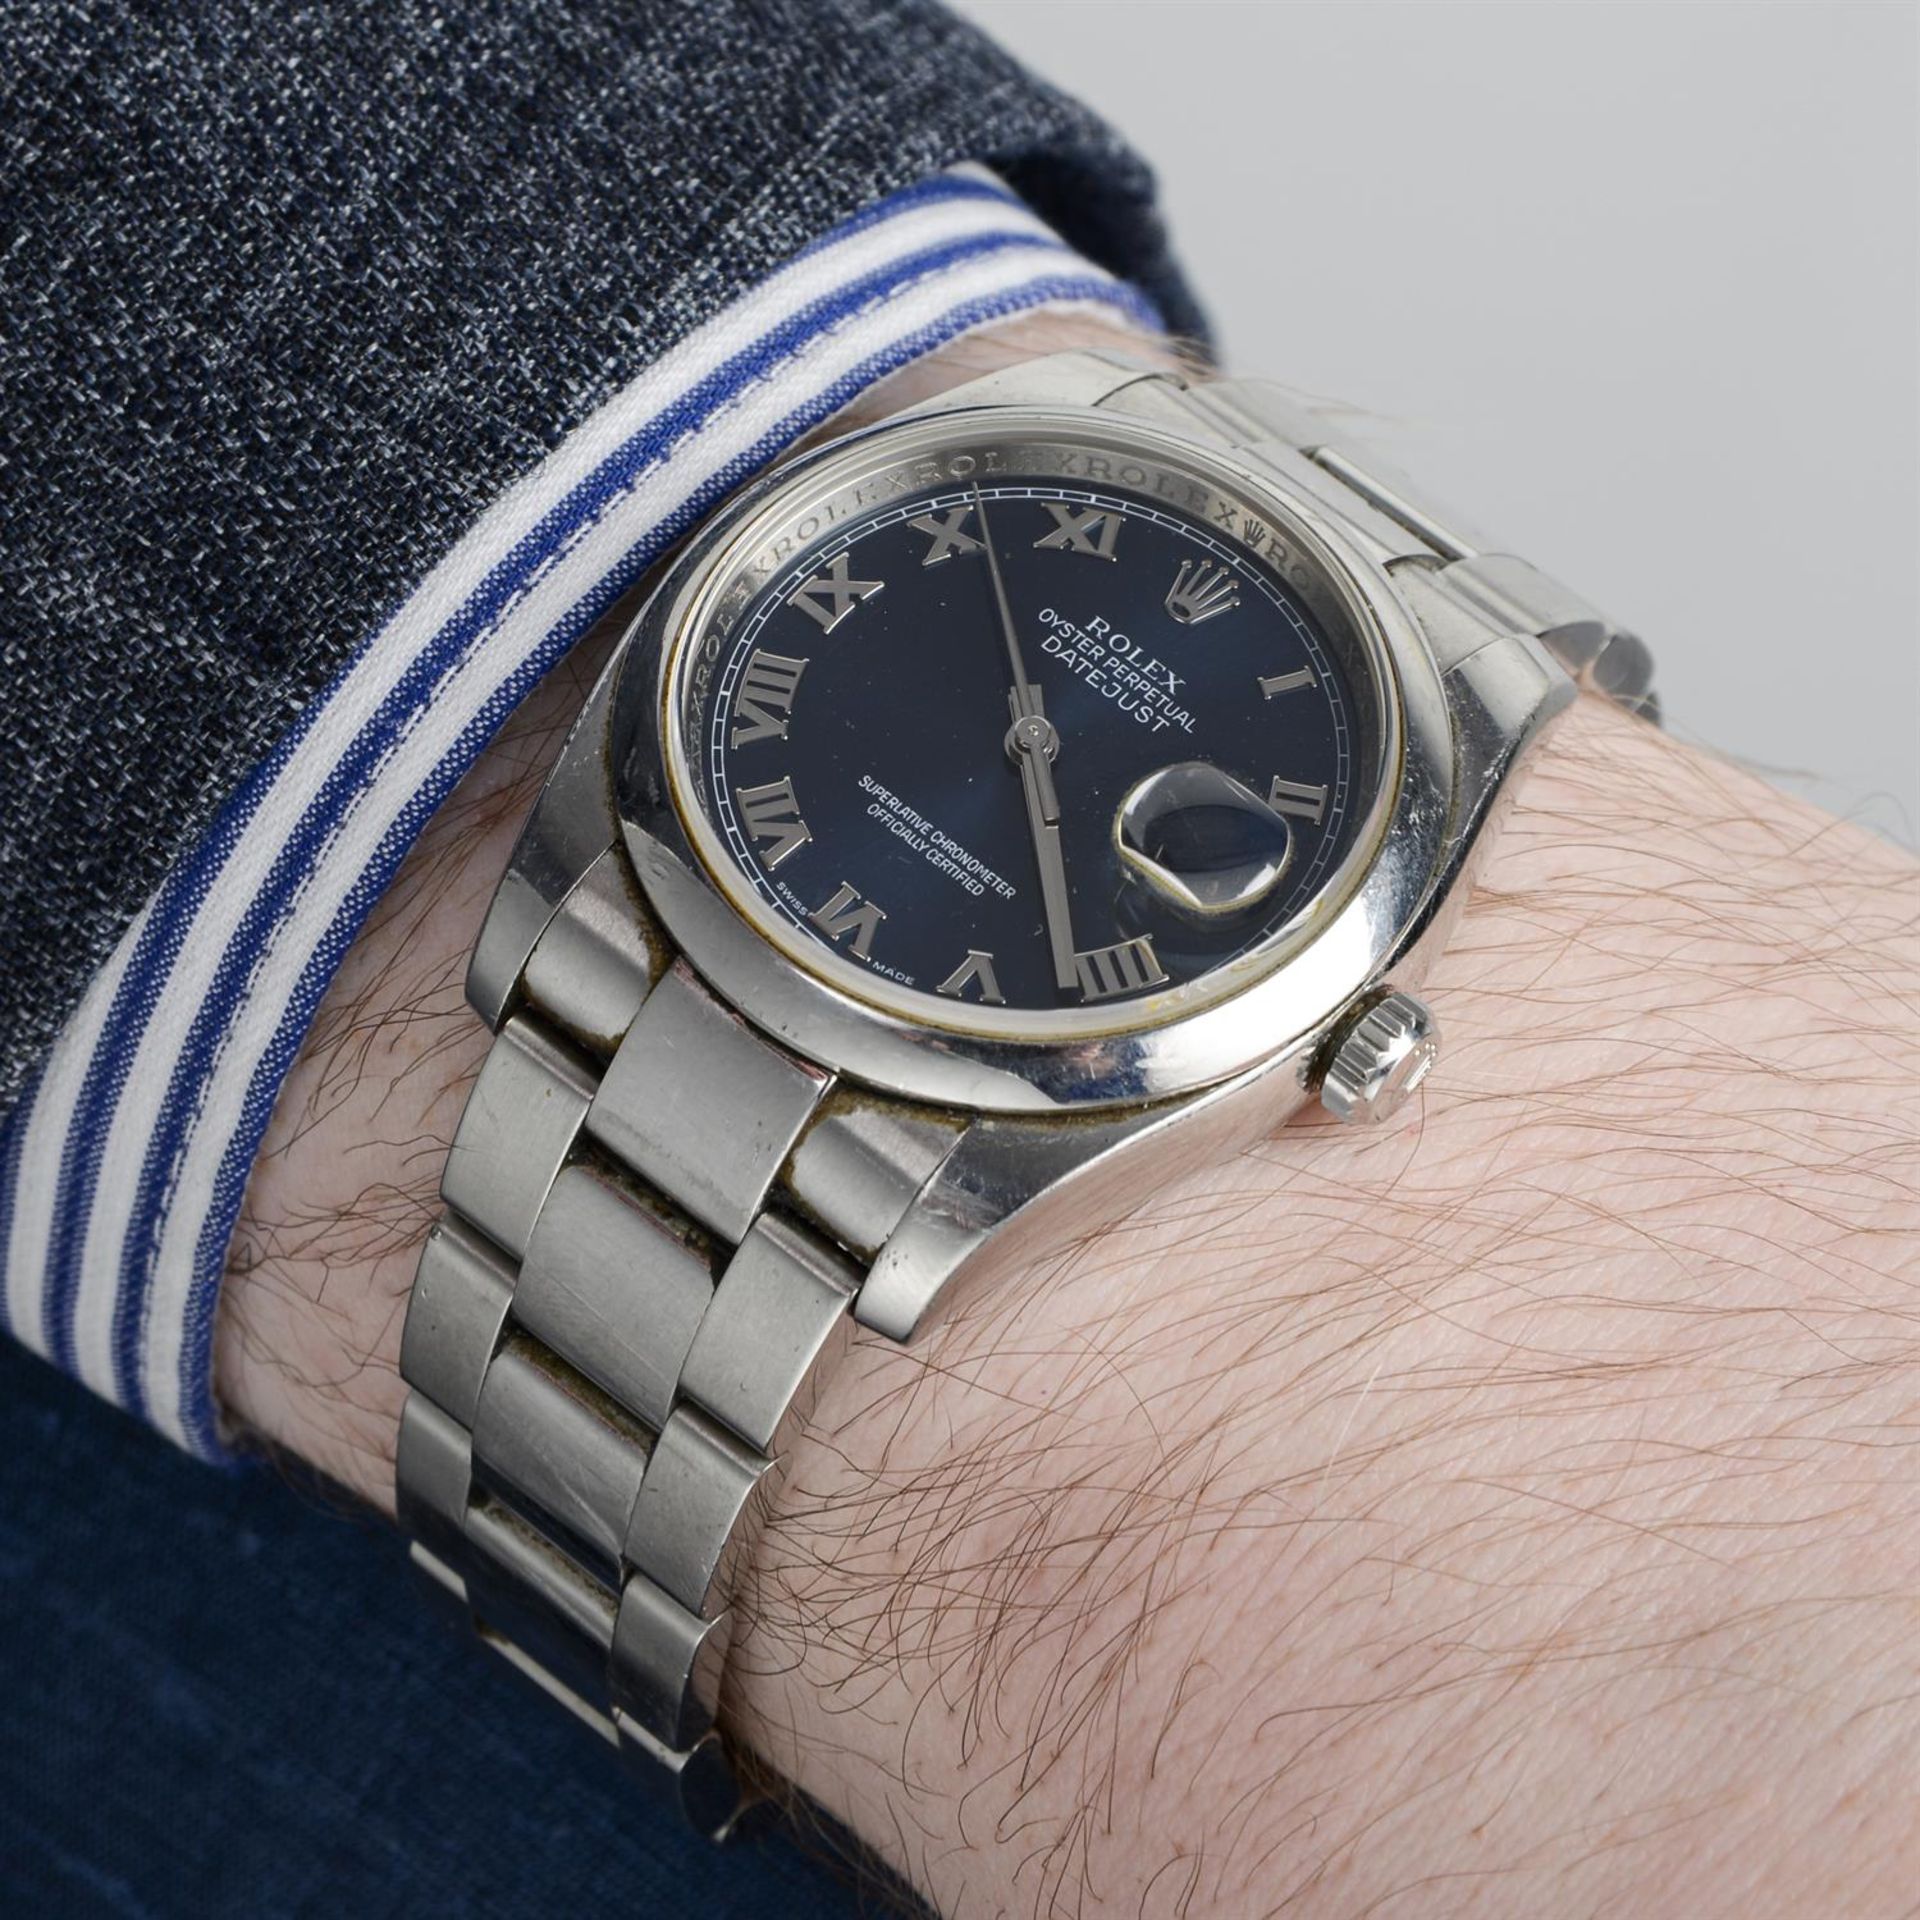 Rolex - an Oyster Perpetual Datejust watch, 36mm. - Image 6 of 6